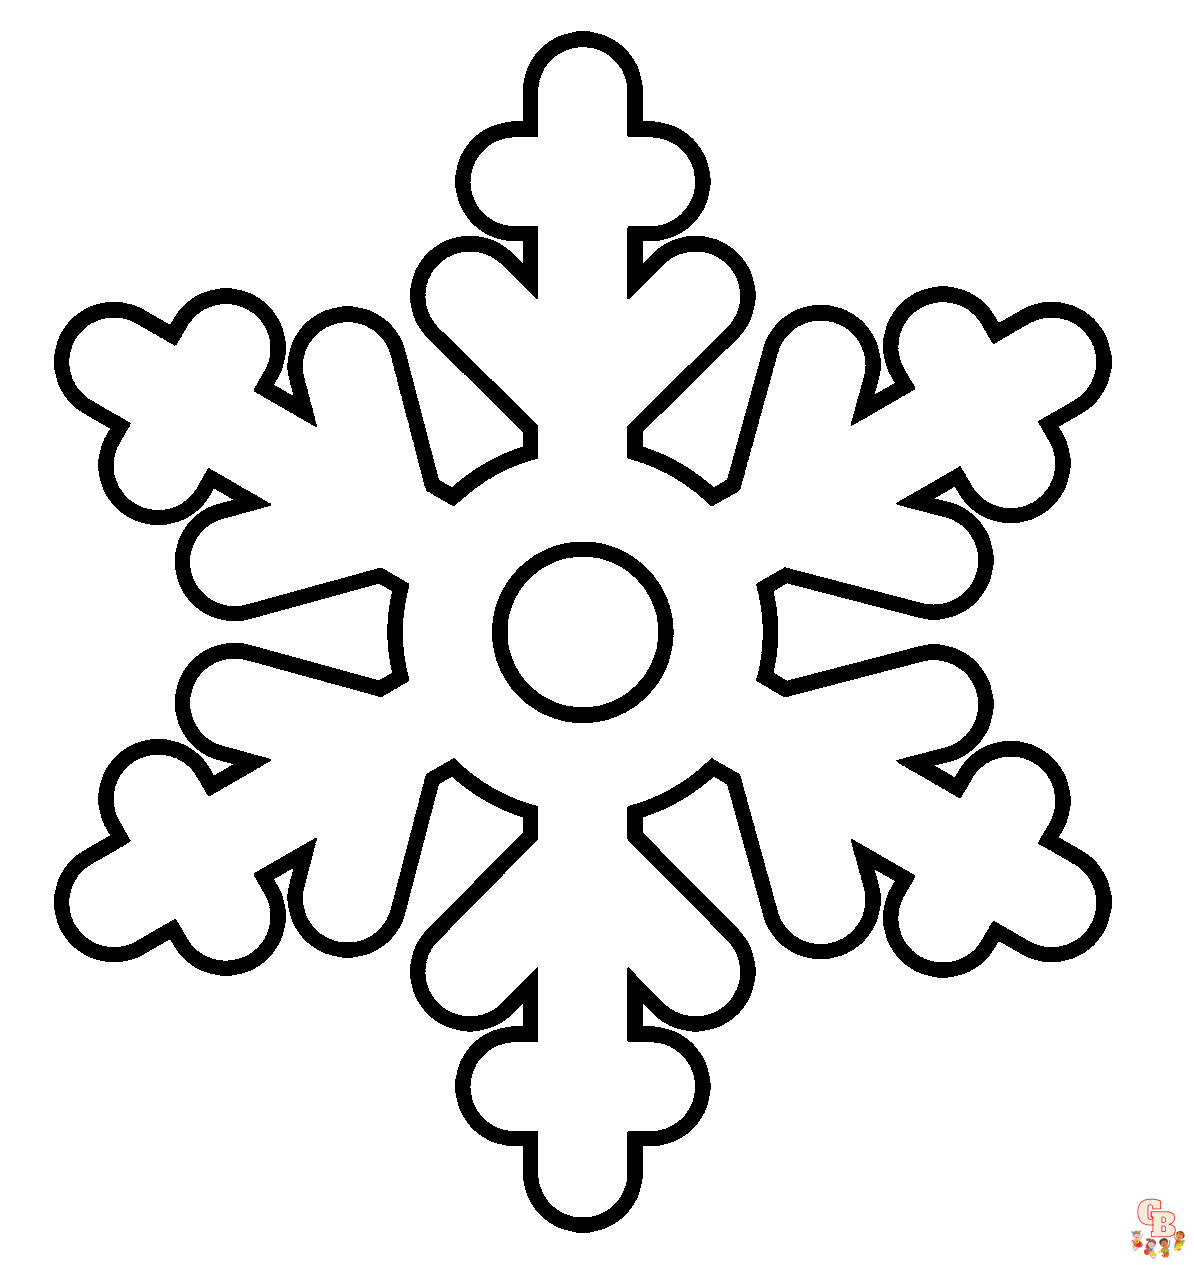 Free Snowflake coloring pages for kids